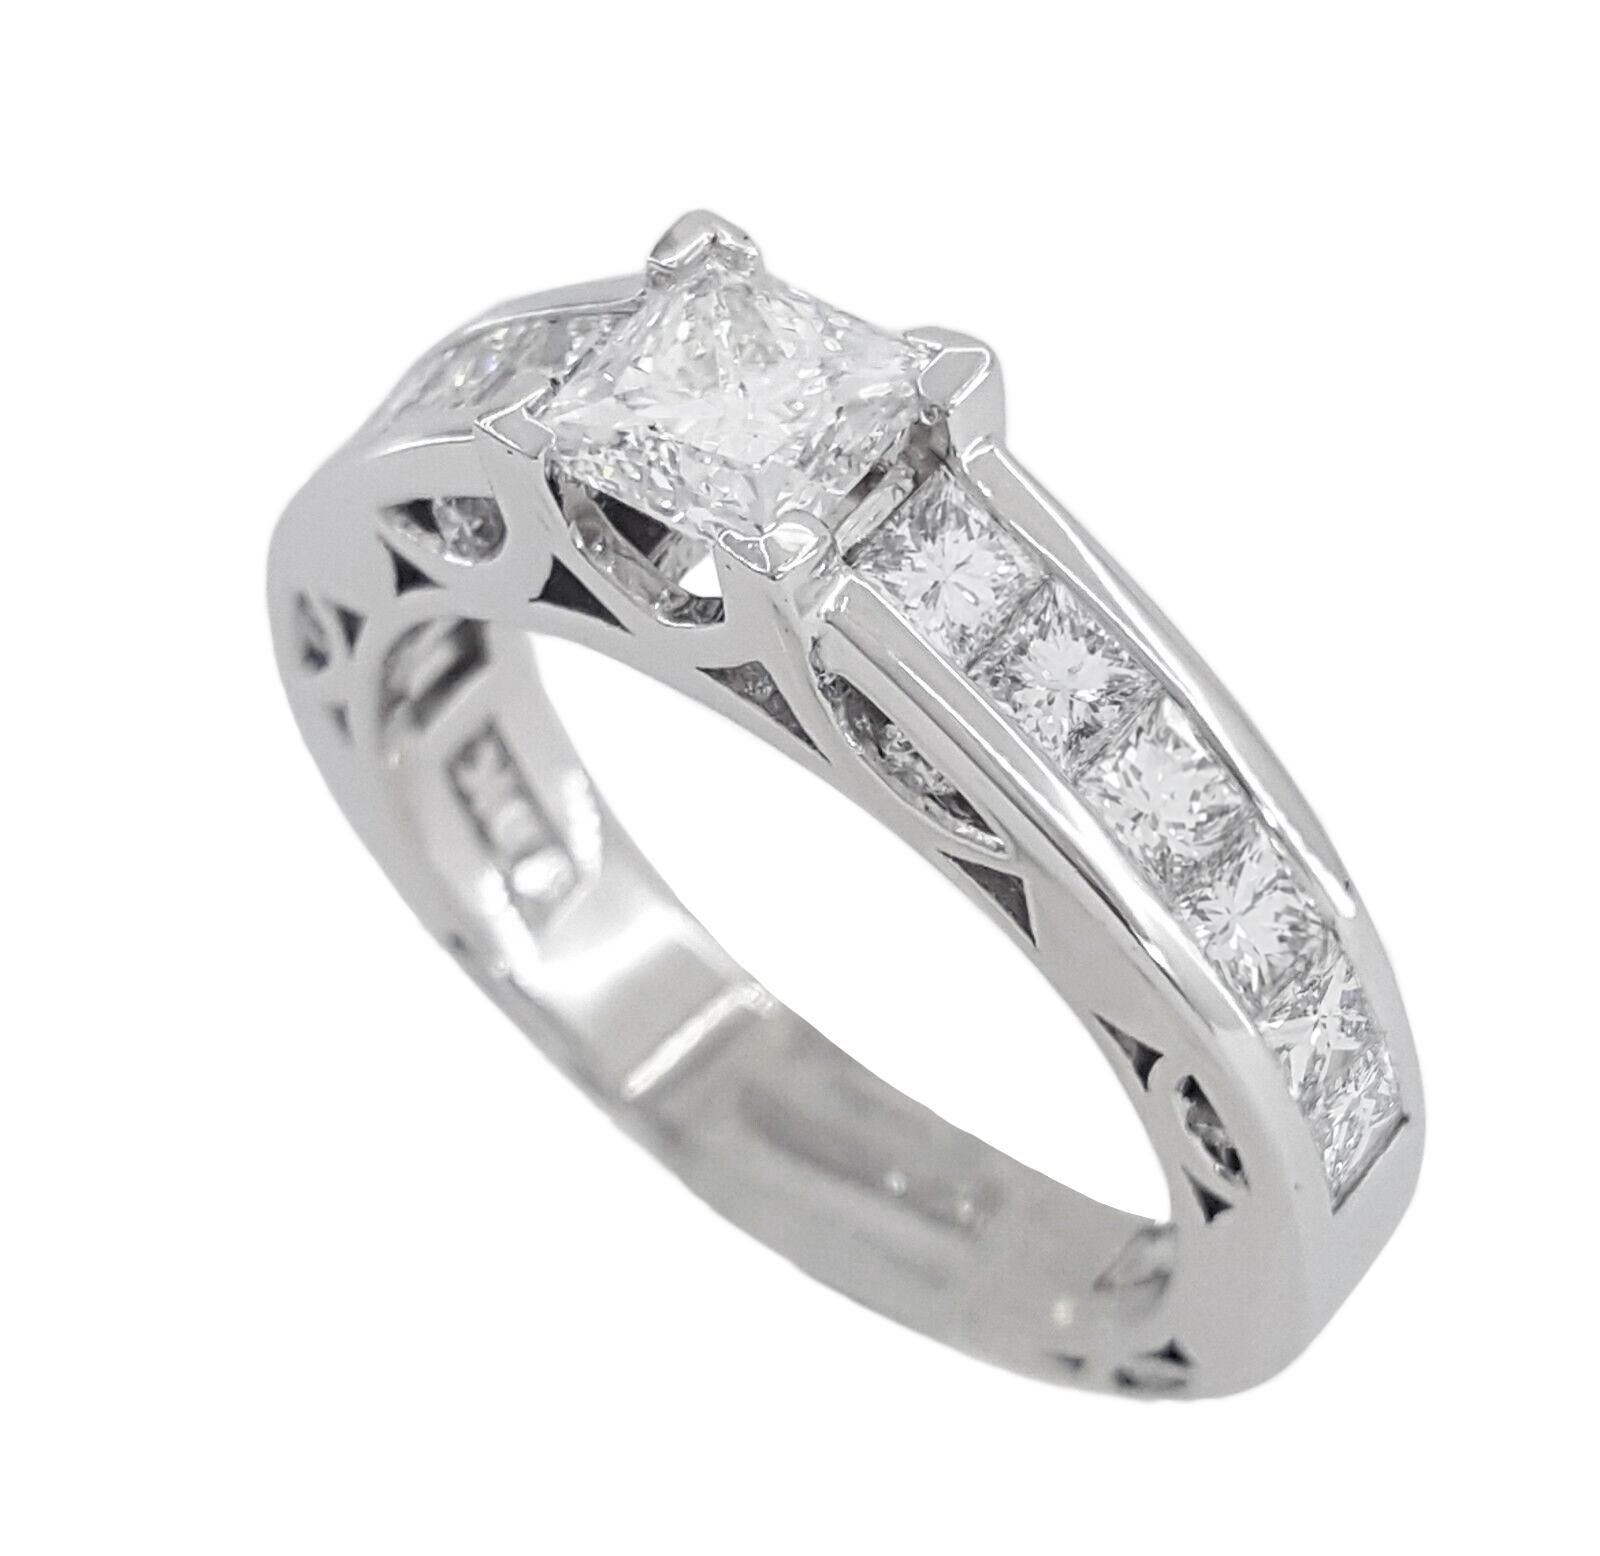 Princess Diamond Engagement Ring Model 28095 in 18k White Gold.


The ring weighs 7.6 grams, size 6.5, the center stone is a Natural Princess Brilliant cut weighing approximately 0.70 ct, F in color, VS1 in clarity, Measuring 4.88x4.83x3.52mm